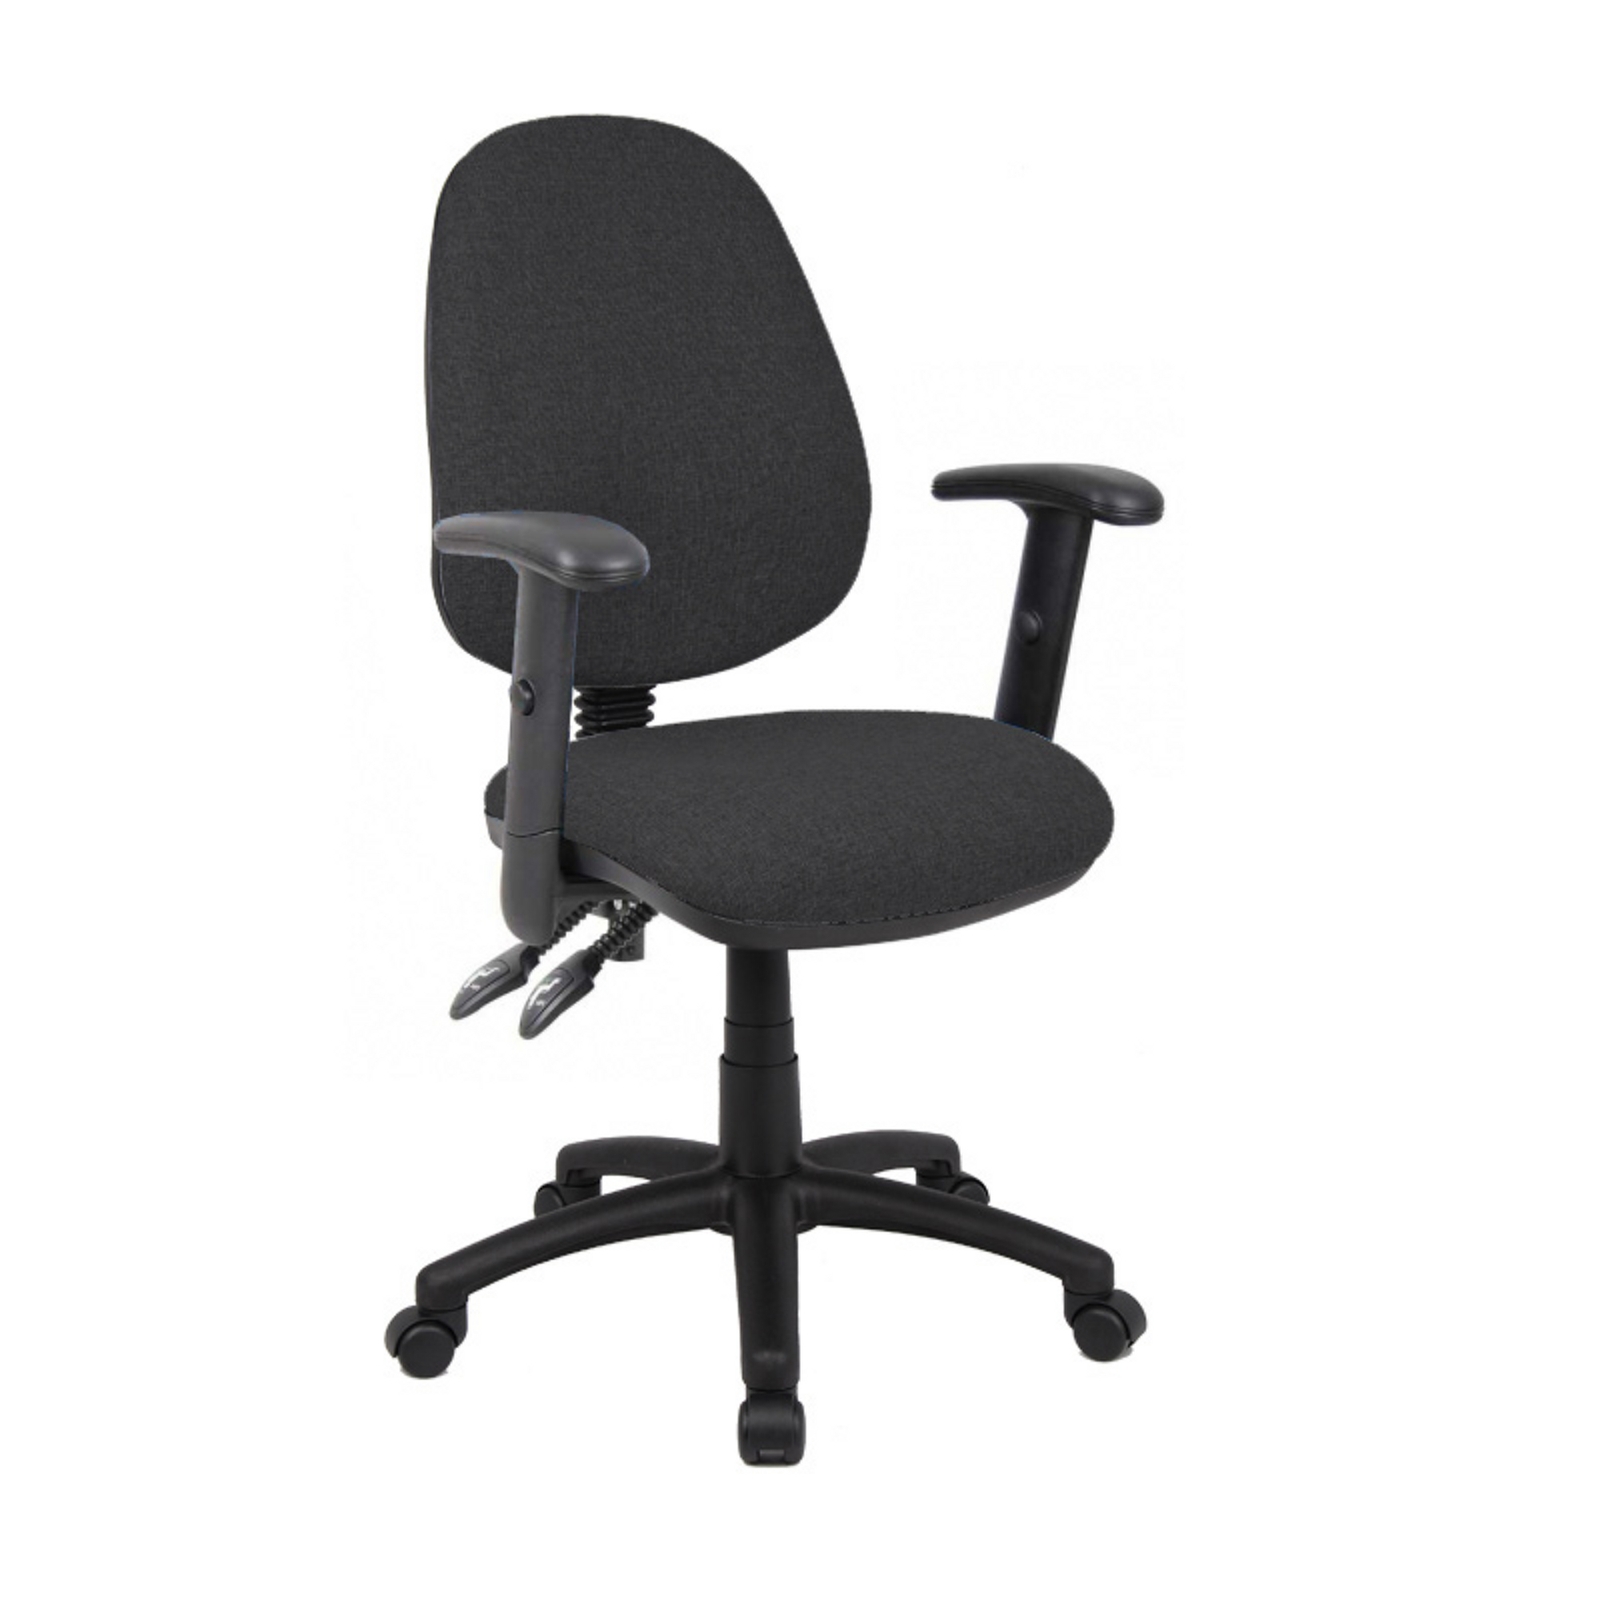 Operator Chair Adjustable Arms - Charcoal